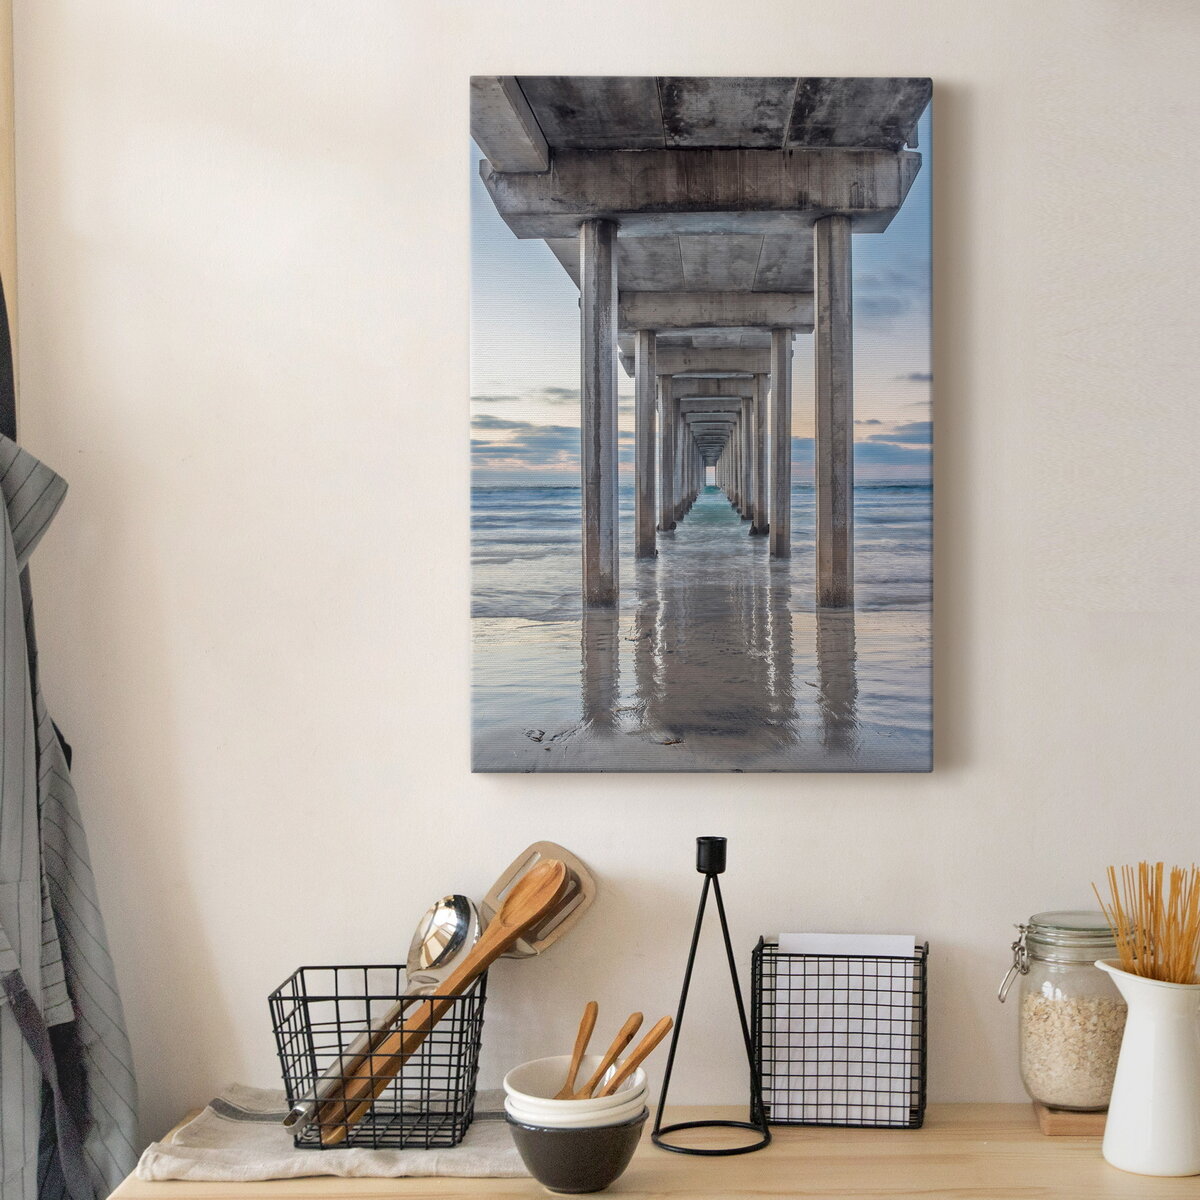 Beneath The Fishing Pier - Wrapped Canvas Photograph Highland Dunes Size: 30 W x 20 H